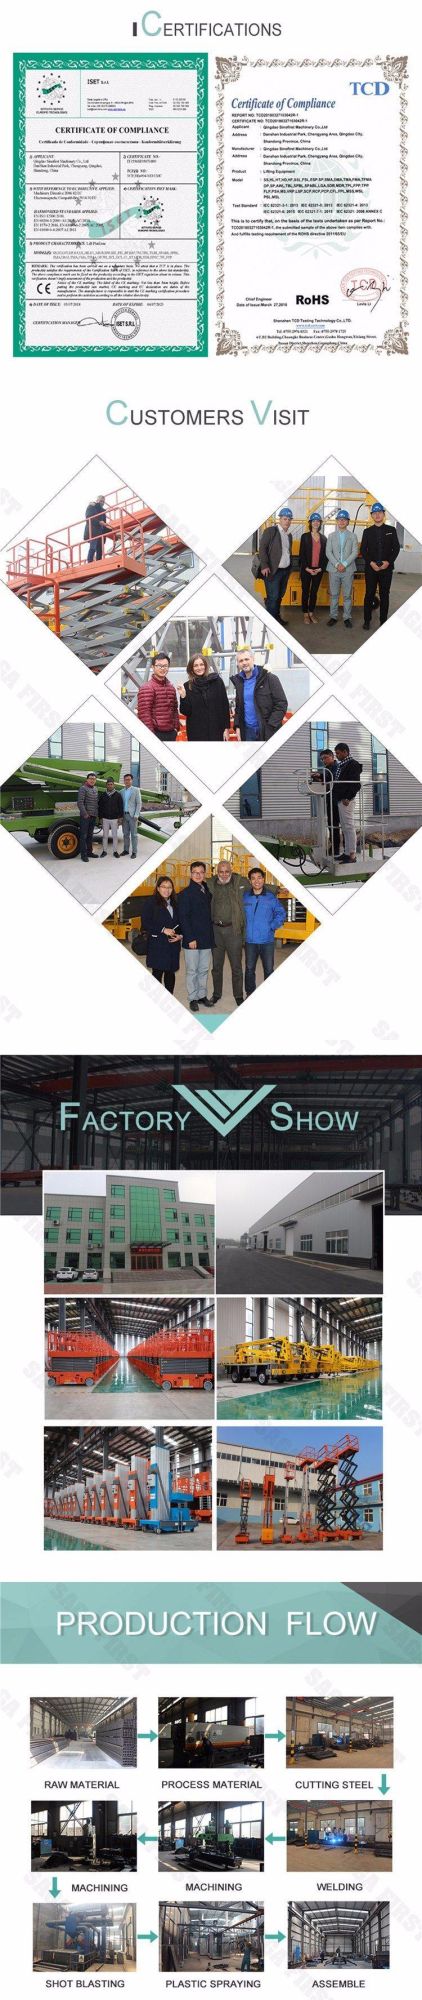 CE ISO High Quality Warehouse Cargo Lift Hydraulic Electric Lift Platform